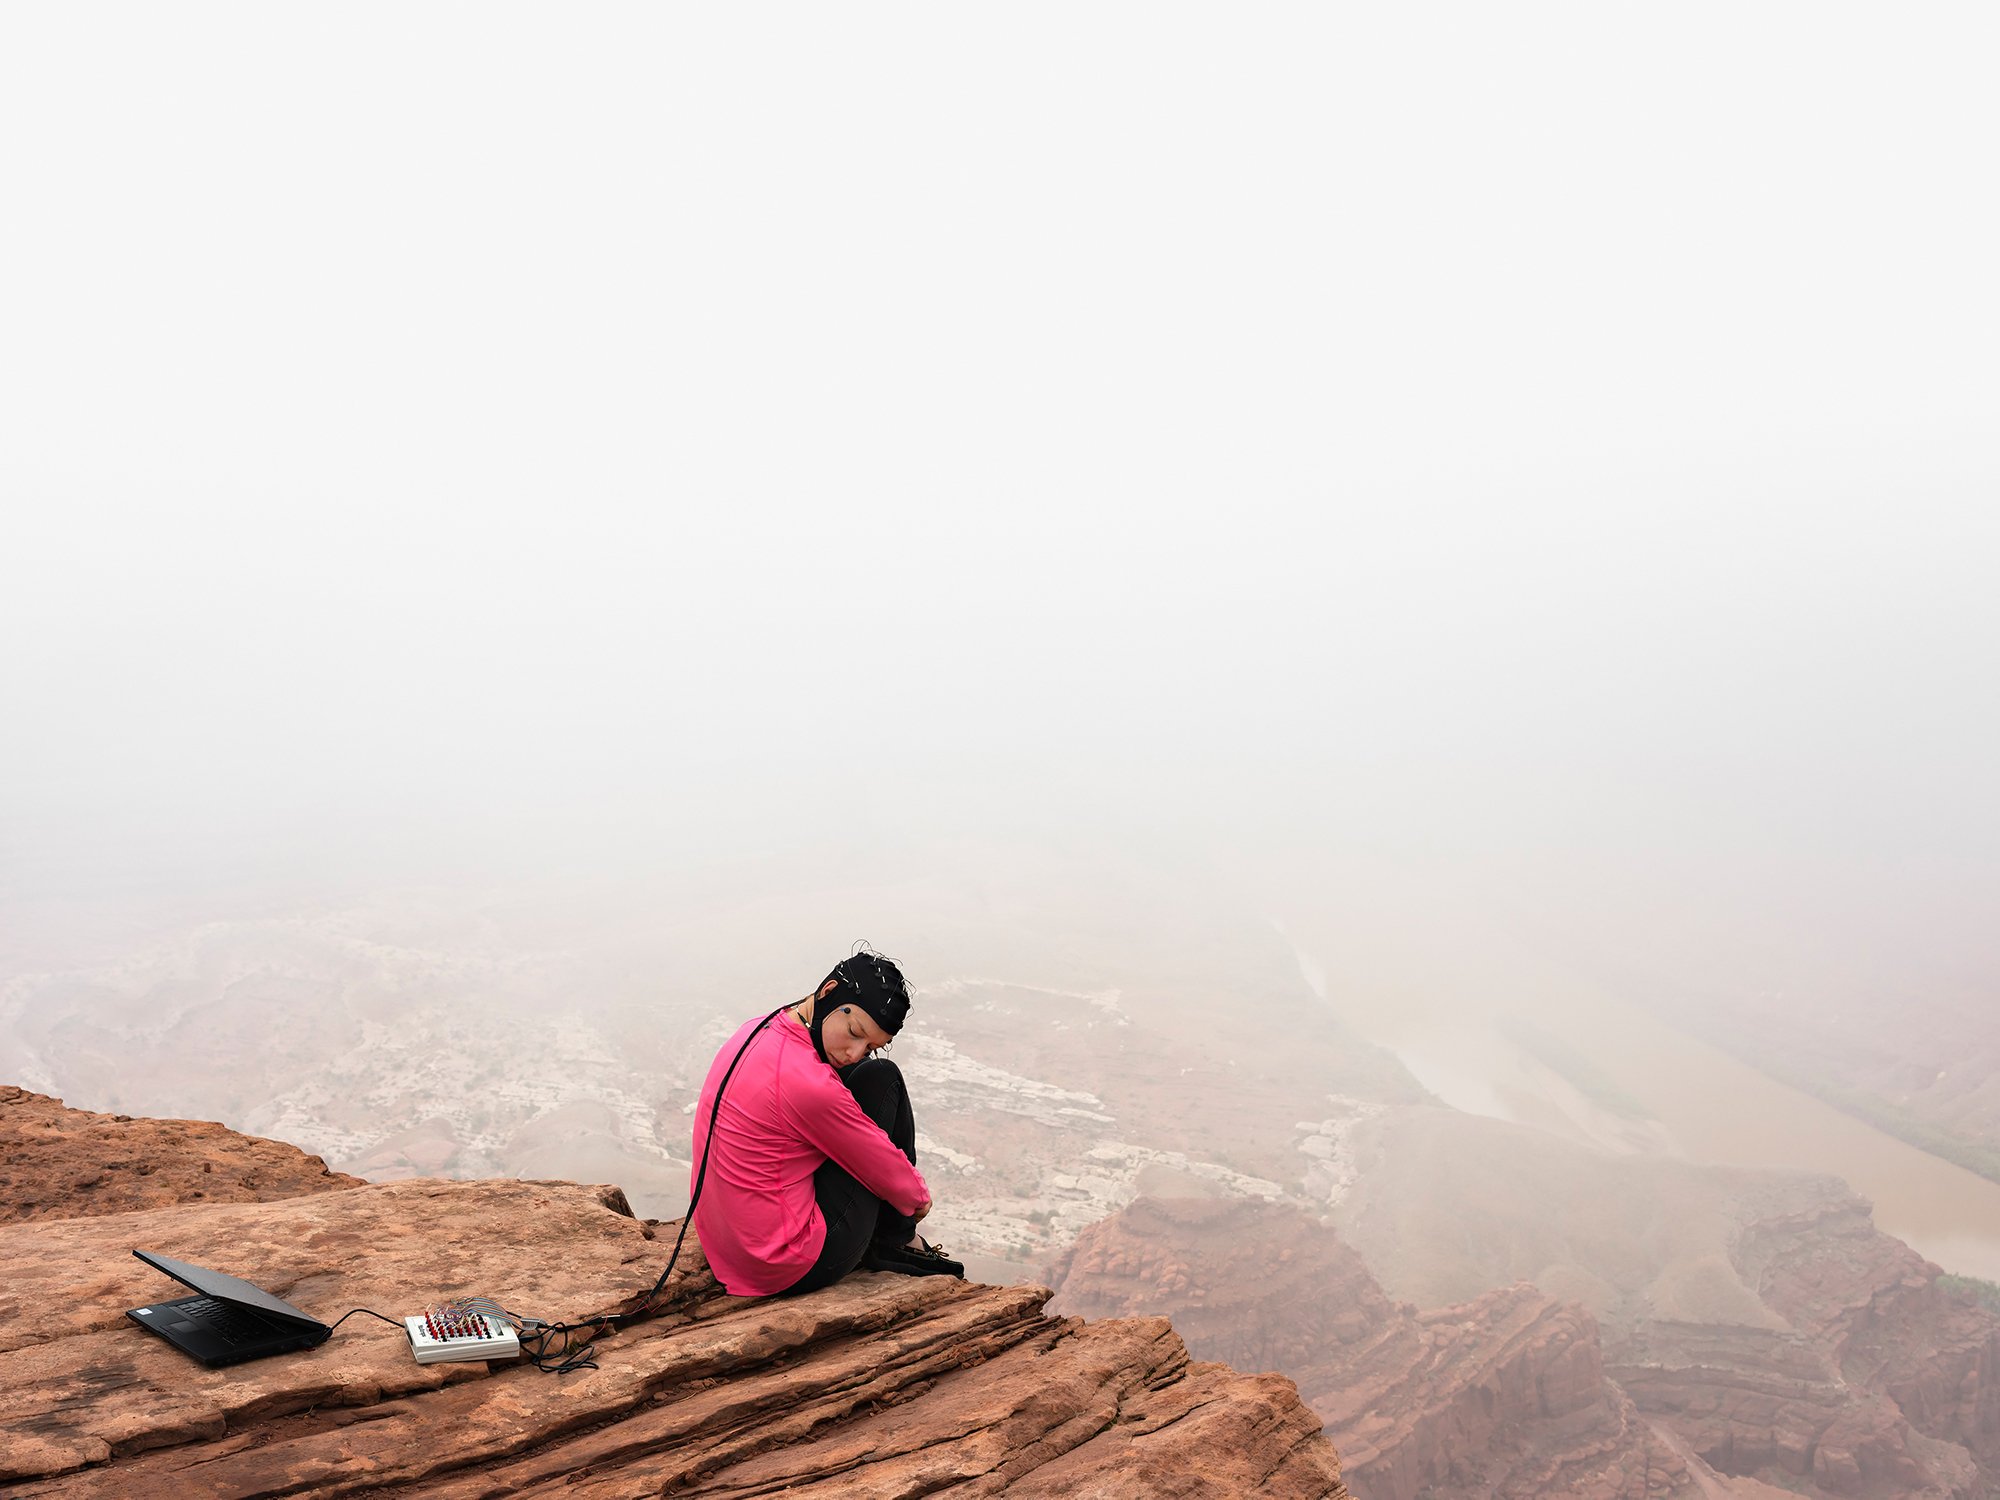 A person sitting and hugging their legs at the edge of a rocky cliff overlooking a foggy dry and mountainous landscape. The person is wearing what appears to be an EEG wired to a laptop.